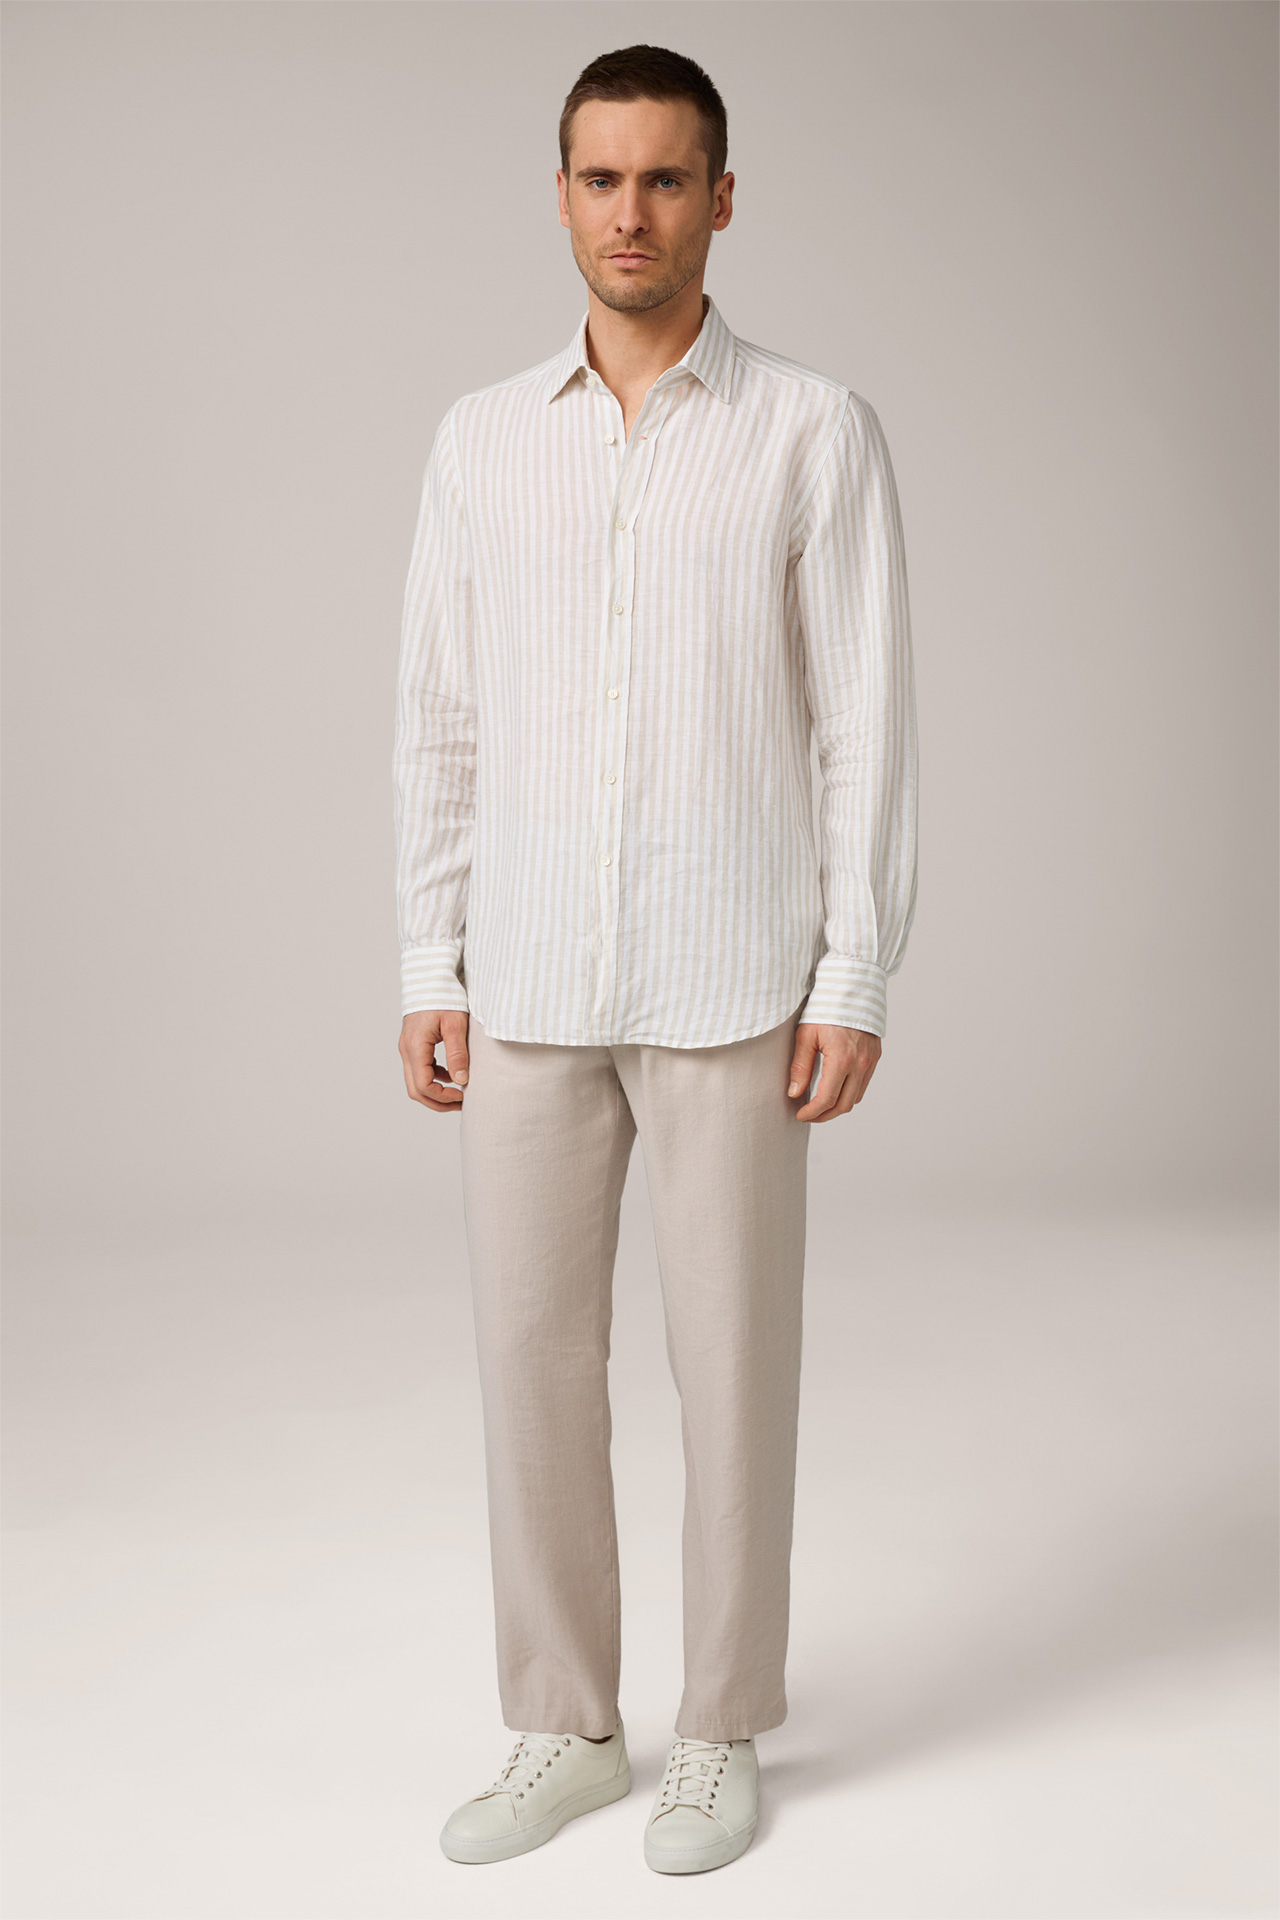 Lapo Linen Shirt in White and Beige Stripes